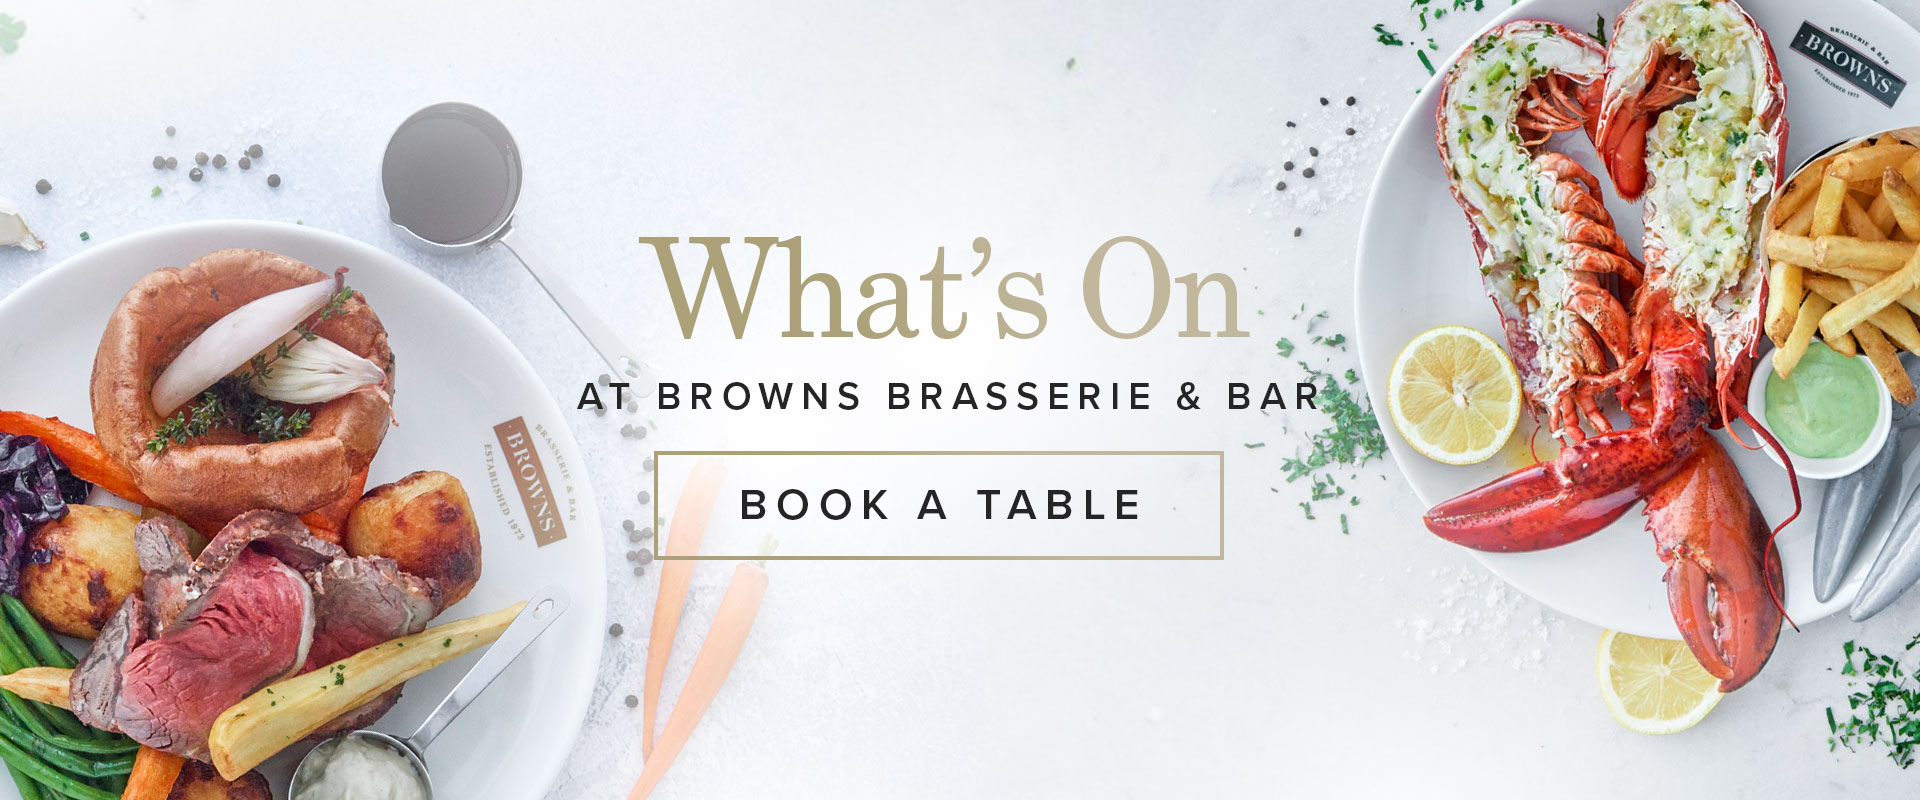 What's on at Browns Brighton | Browns